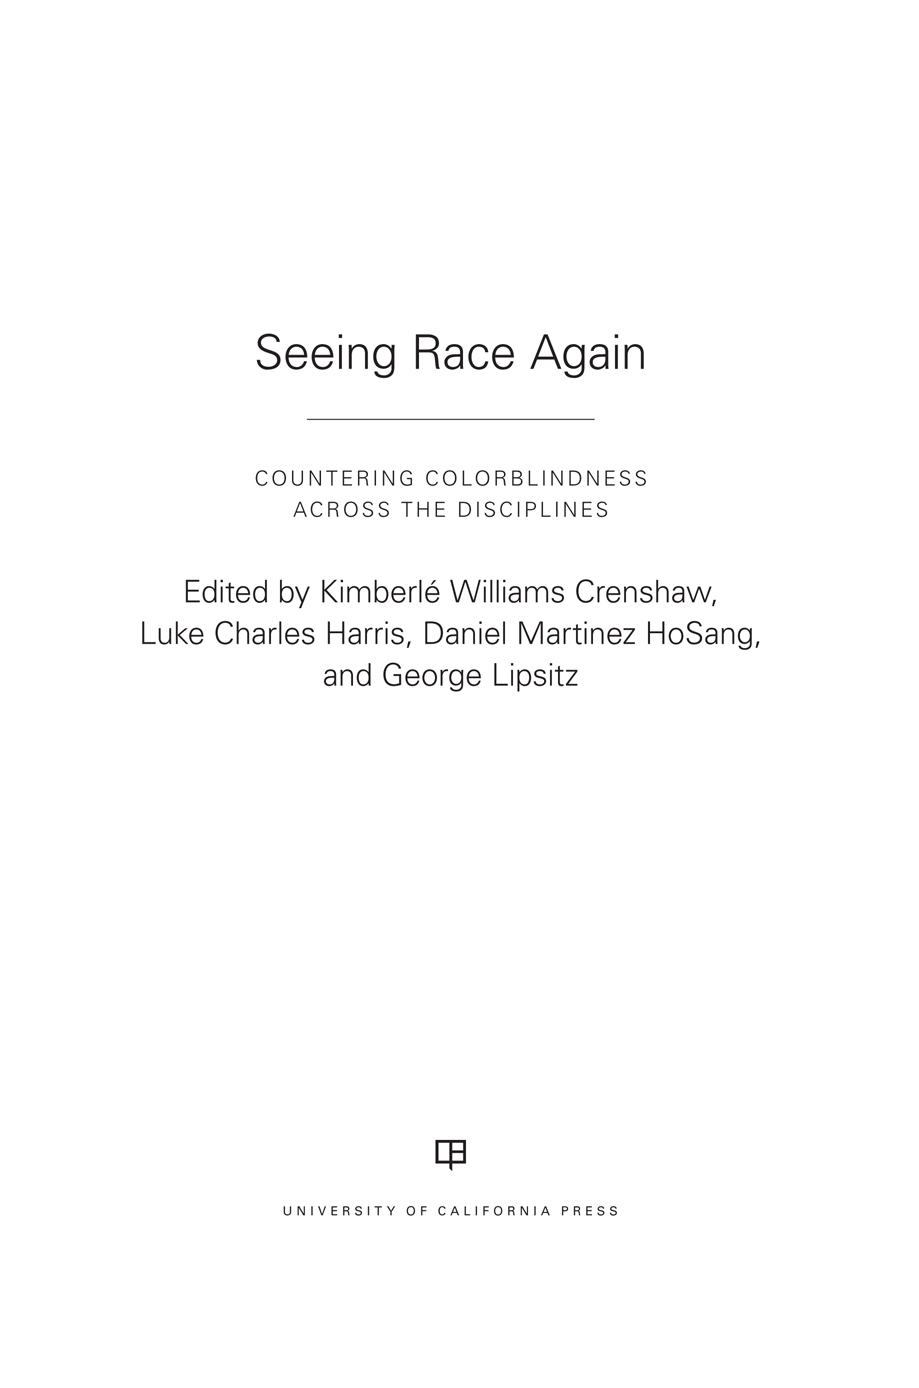 Seeing Race Again The publisher and the University of California Press - photo 1